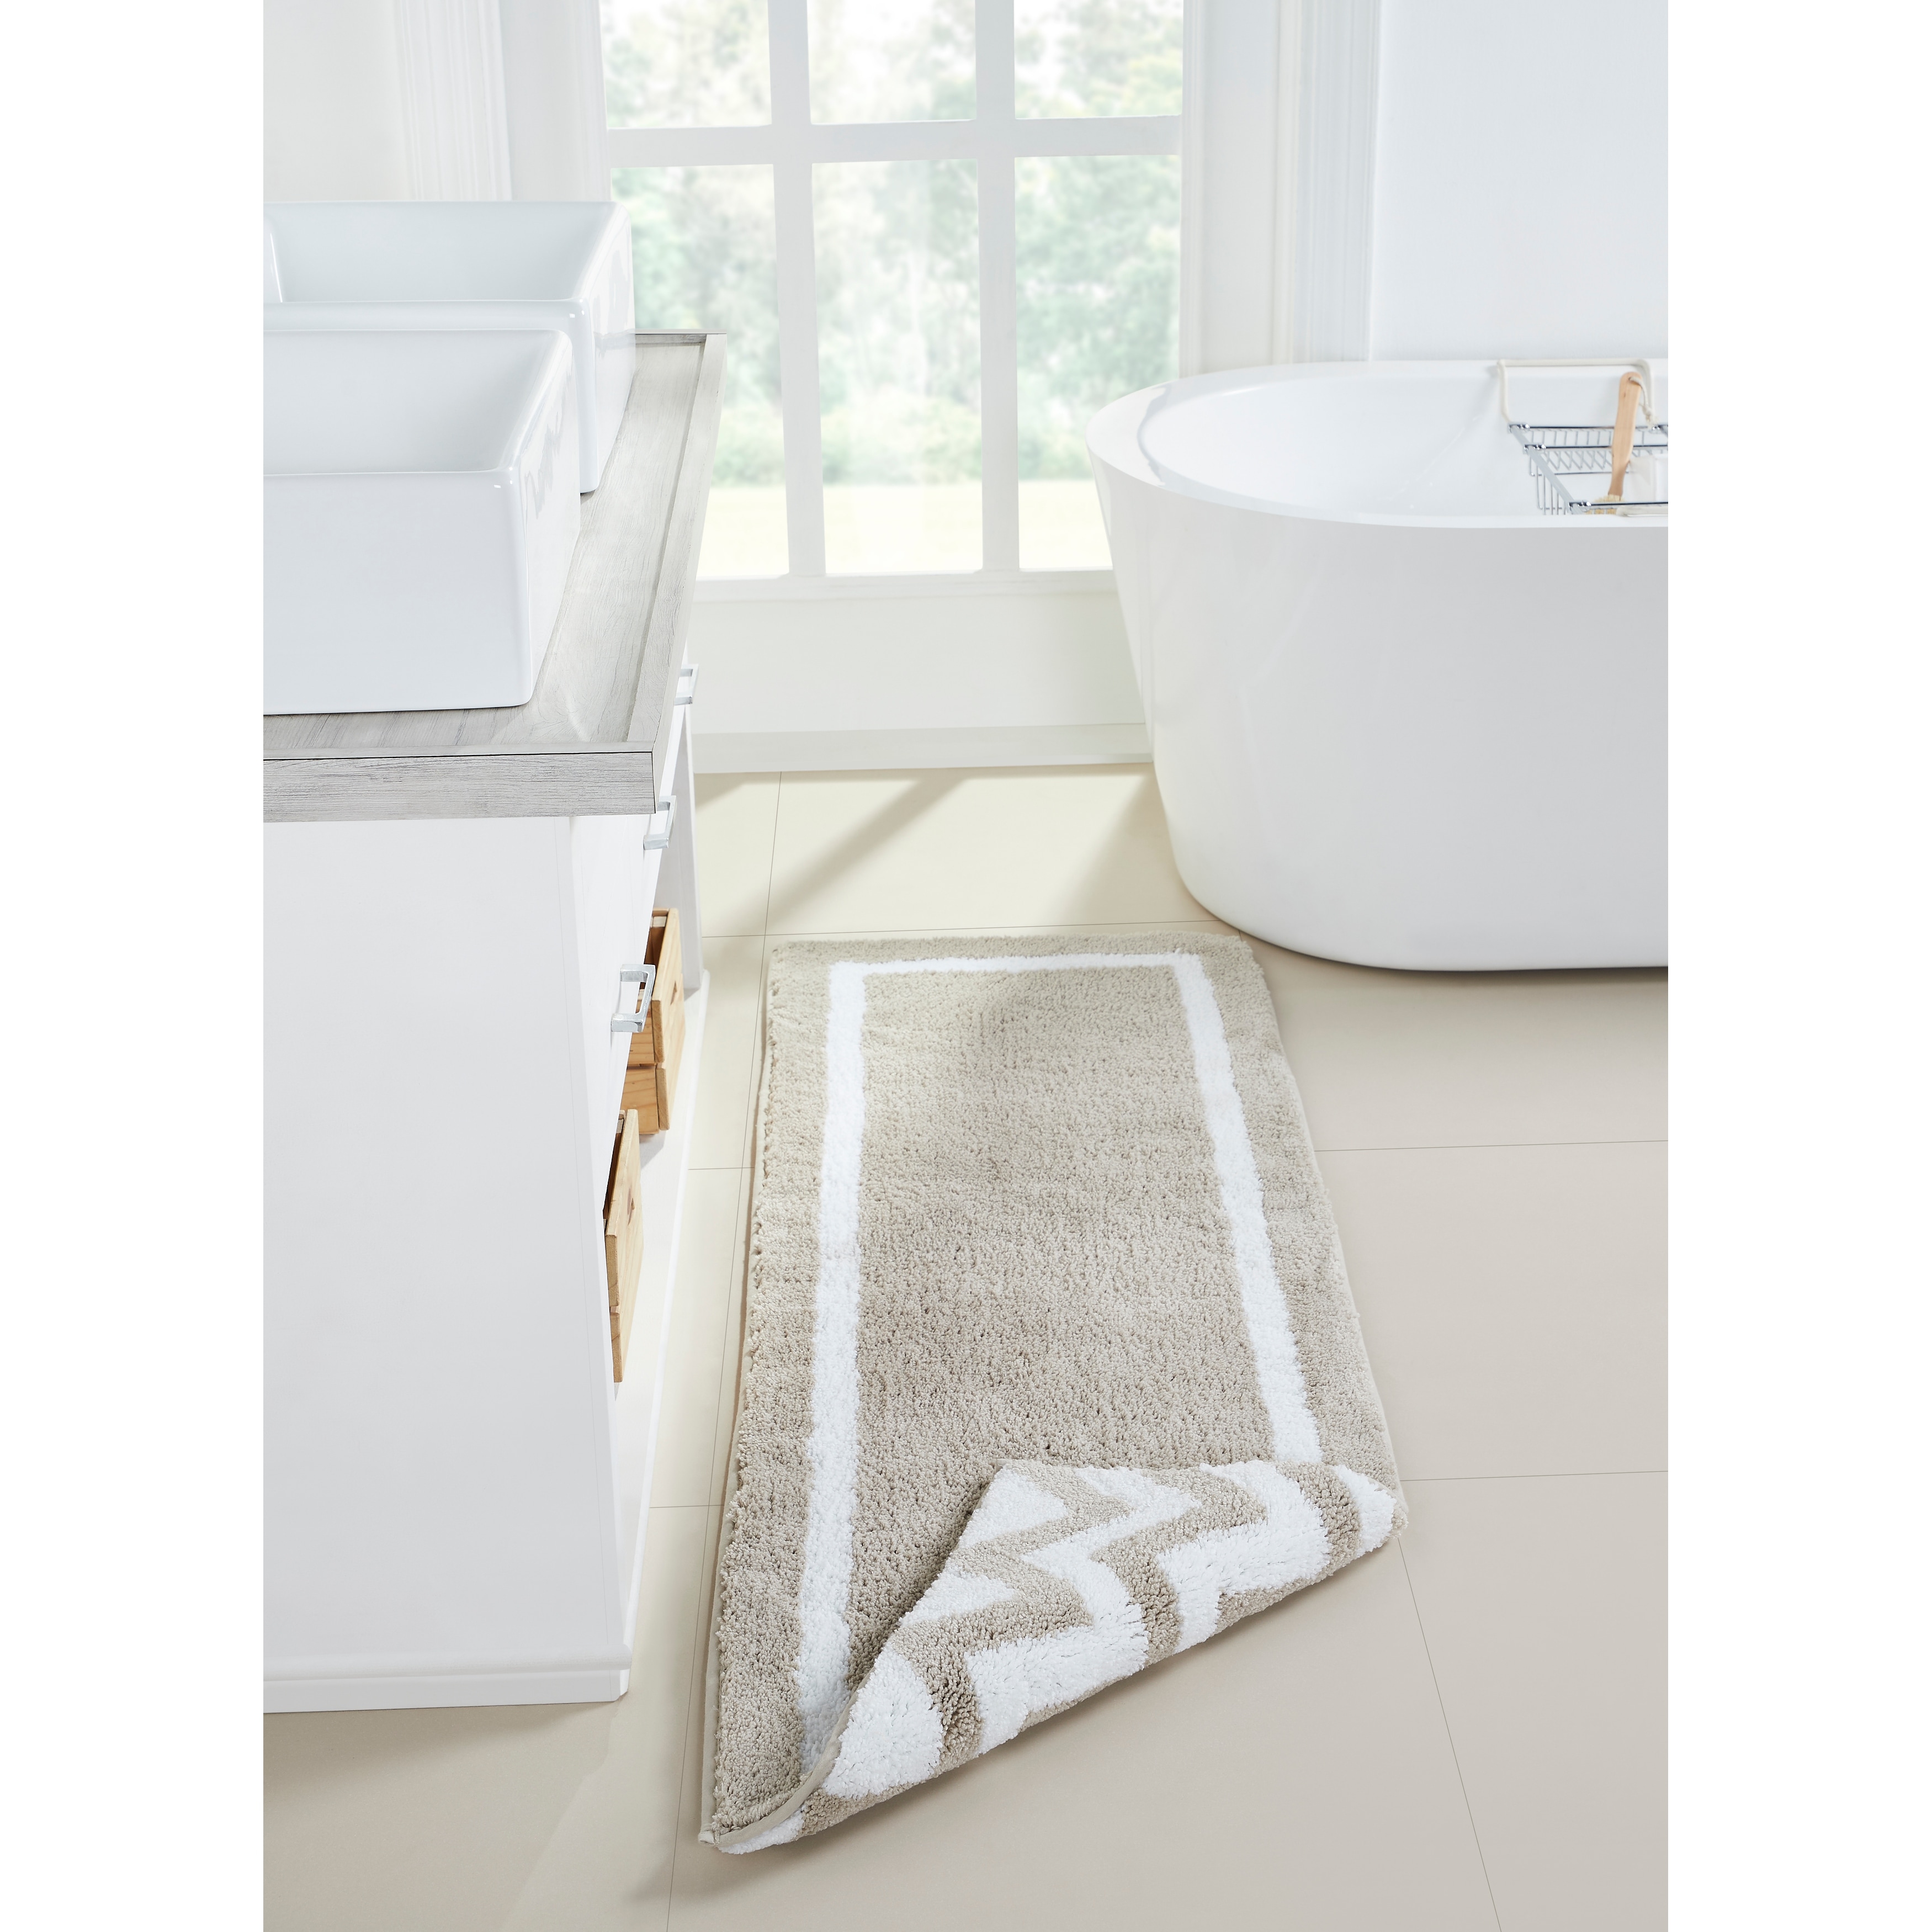 https://ak1.ostkcdn.com/images/products/is/images/direct/ee5c6a76b82f3b40dcfe47f69c0f2e68adb836d7/Better-Trends-Pegasus-Tufted-Reversible-Bath-Mat-Rug-100%25-Polyester.jpg